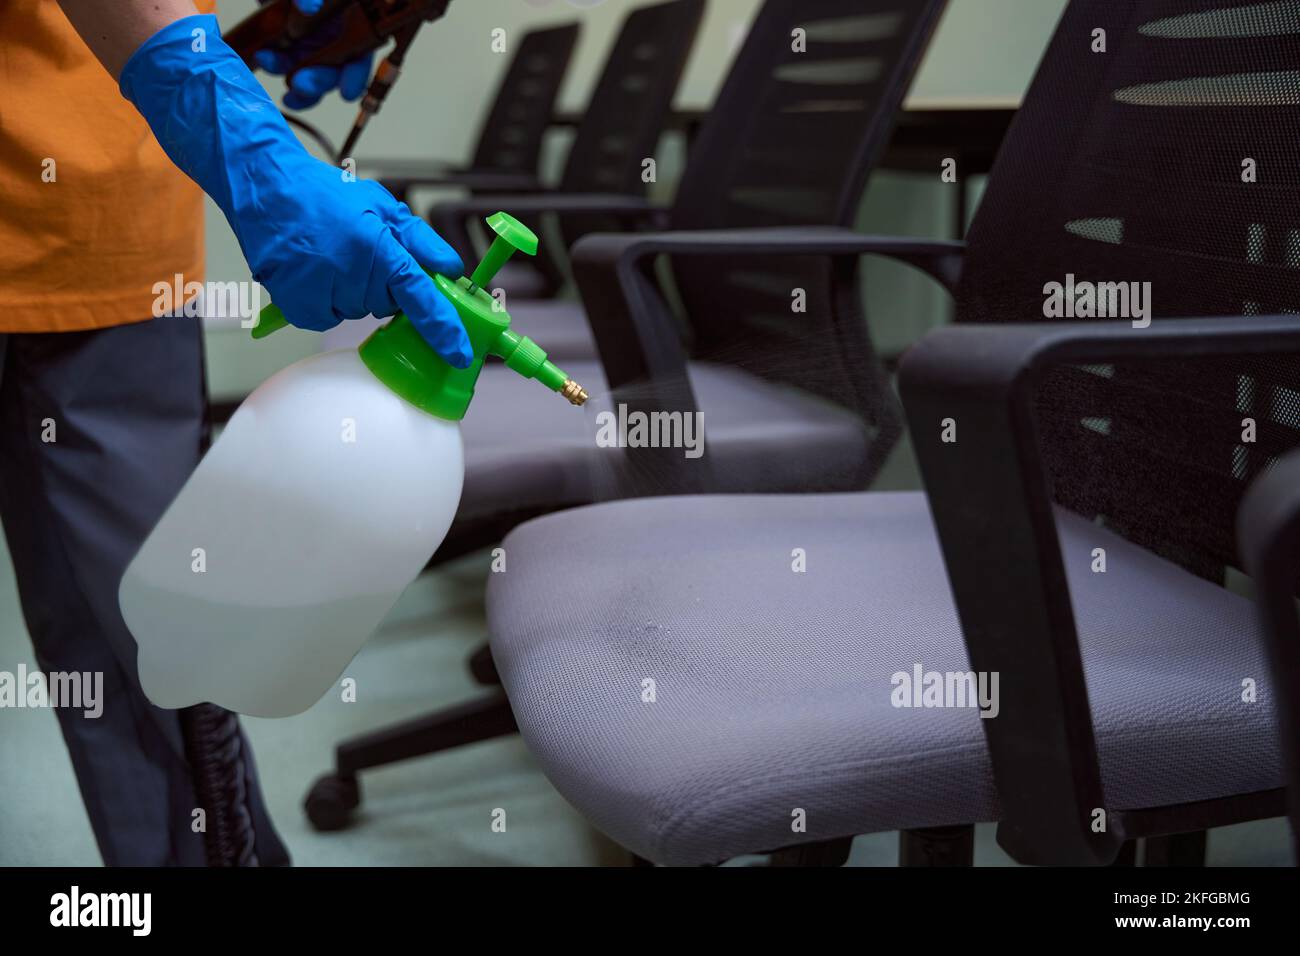 Well-trained janitor with sanitizer spray following room sanitation protocols Stock Photo